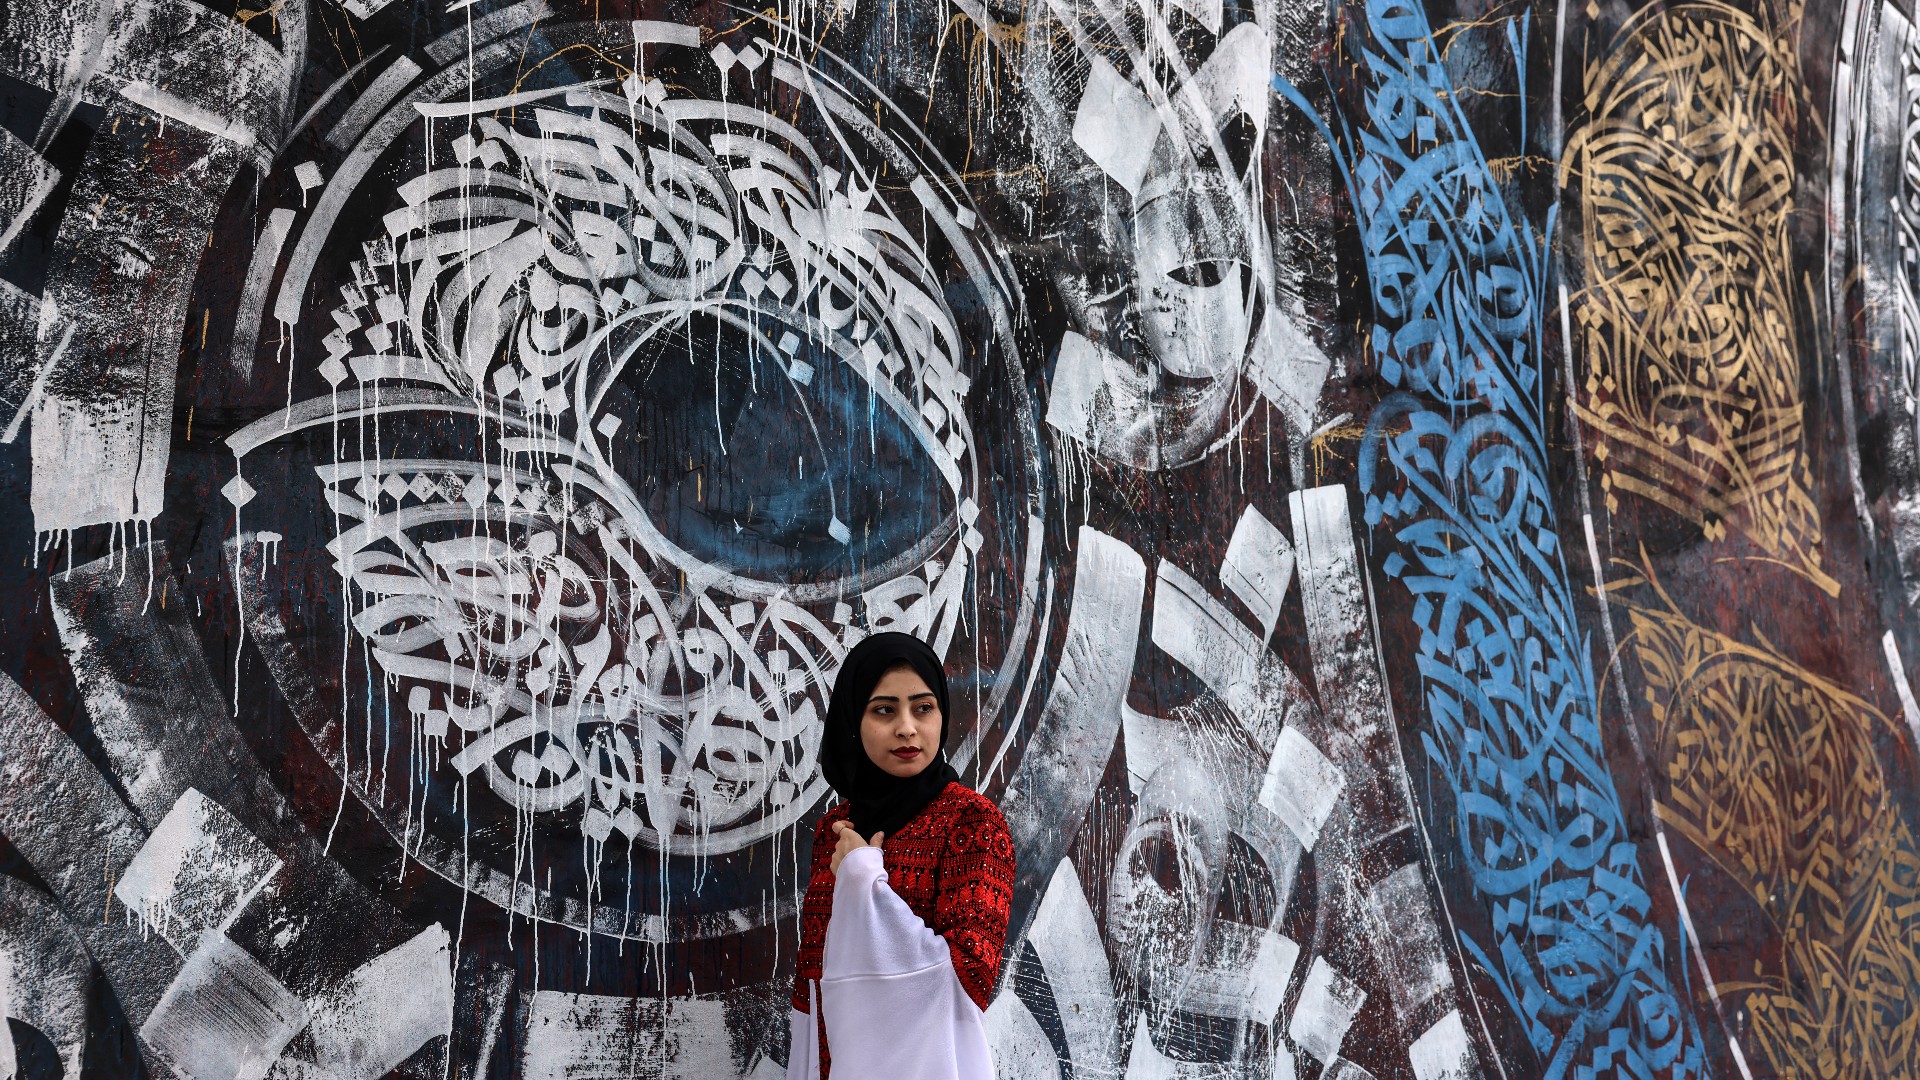 A Palestinian university student wearing a traditional embroidered dress, stands in front of a mural painting representing Arab caligraphy, during an event entitled 'Don't Steal Our Heritage' in Gaza City, on 16 December, 2021 (AFP)